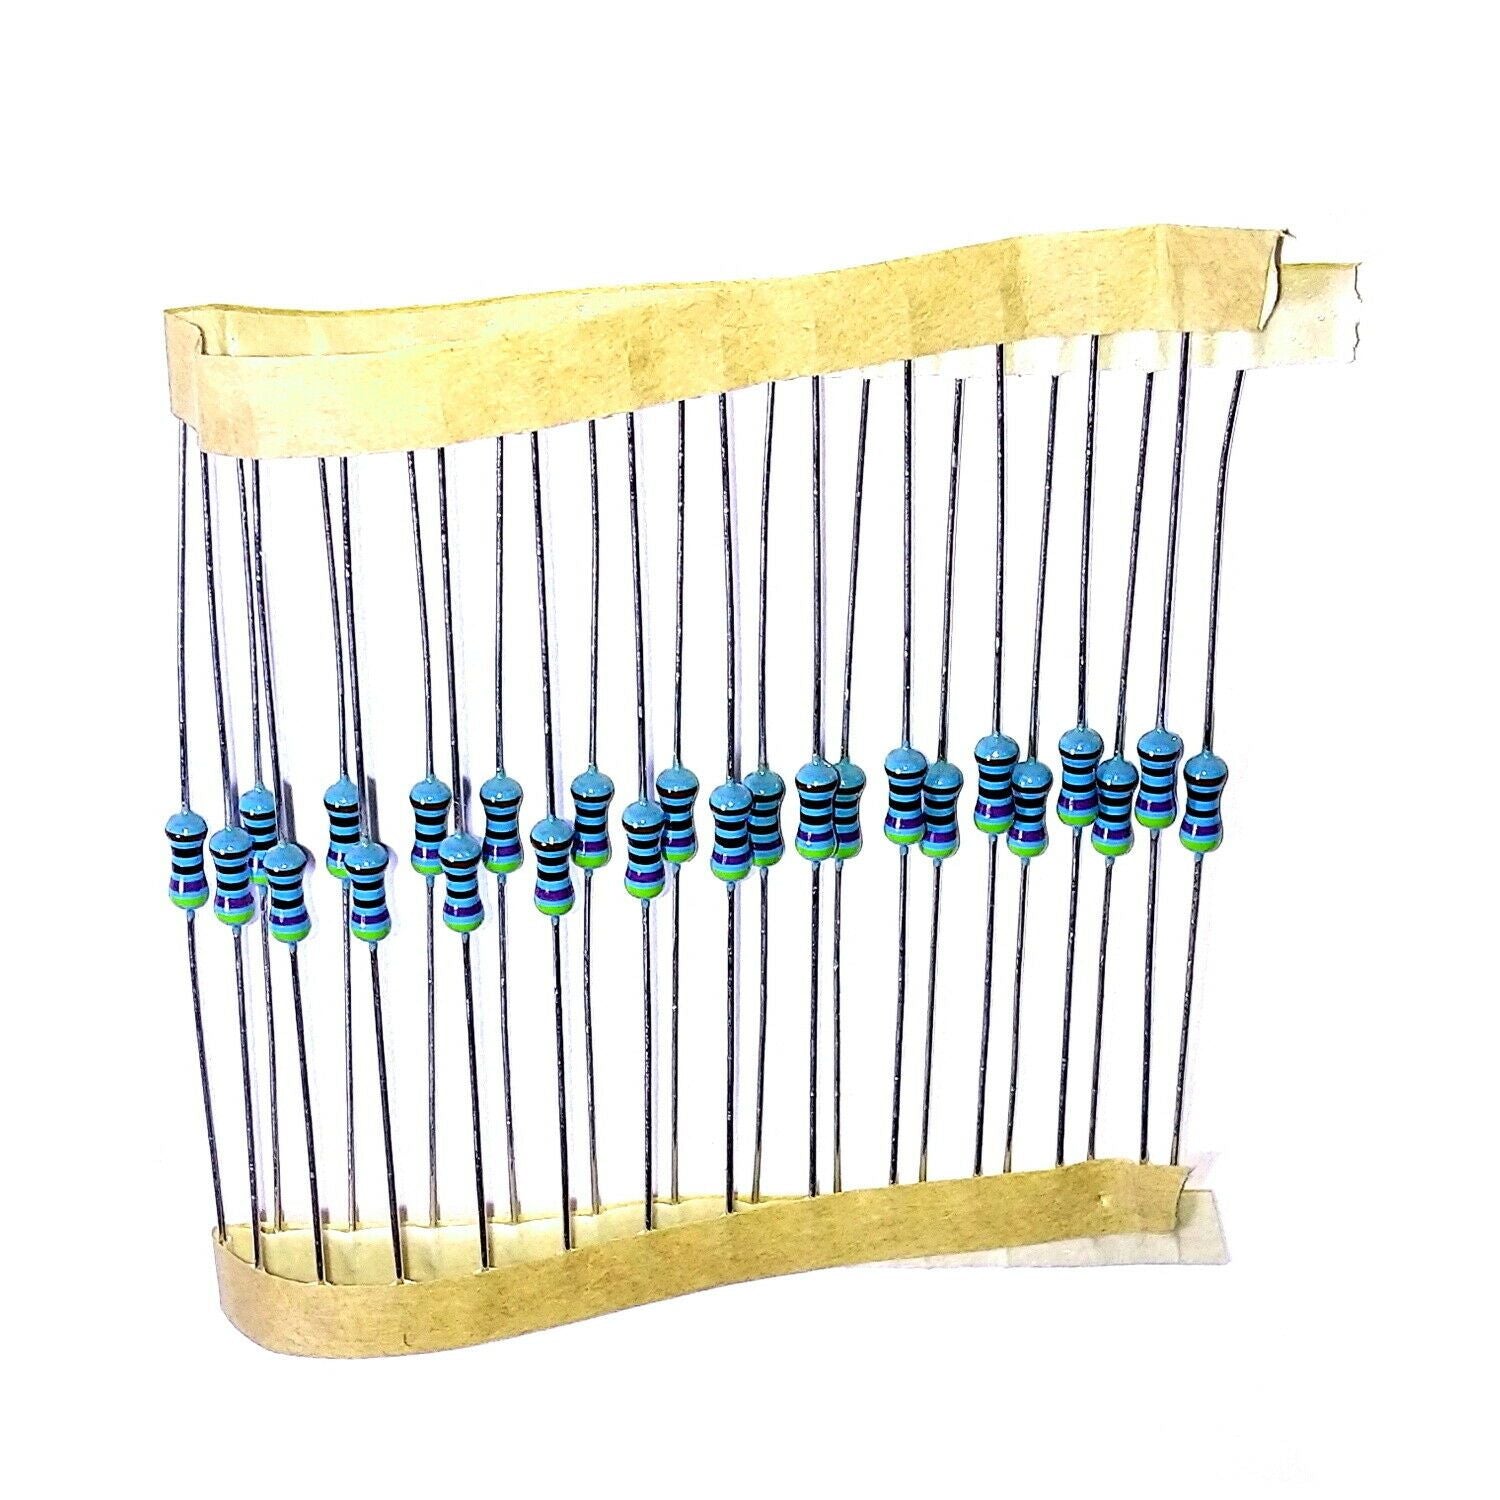 Pack 100 MR25 Metal Film 1% 50ppm Resistor Values from 10R to 10K